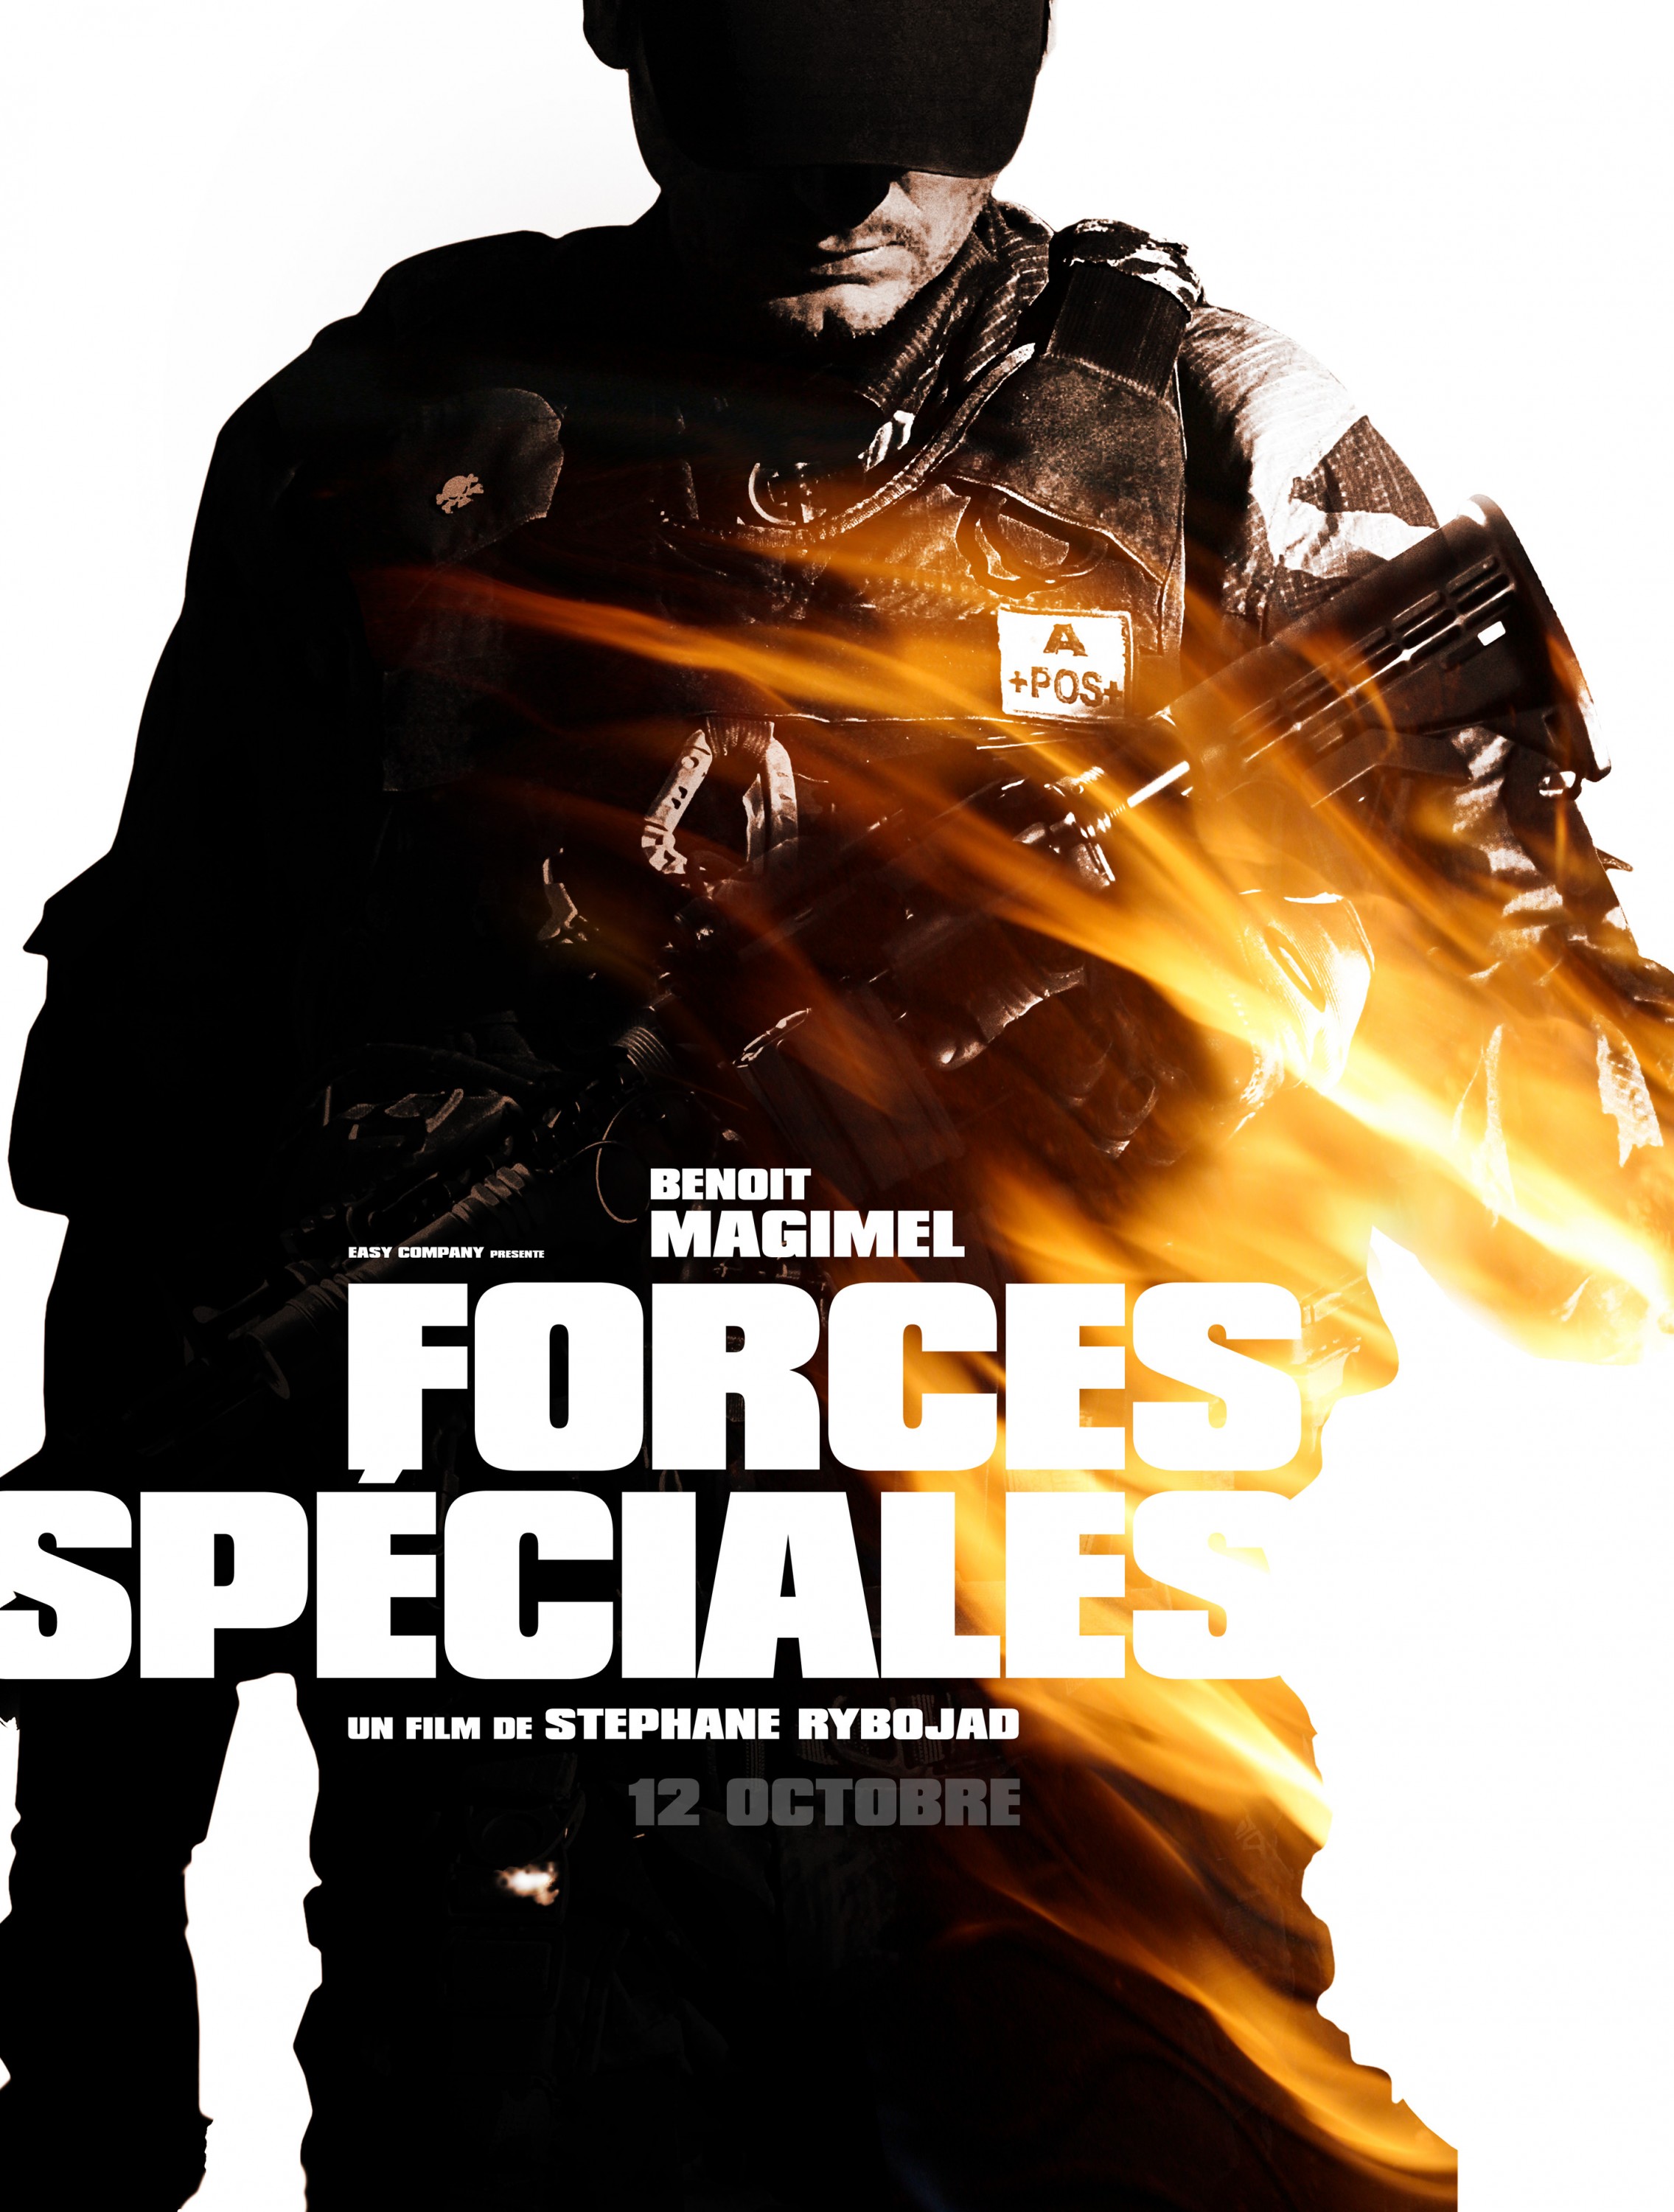 Mega Sized Movie Poster Image for Forces spéciales (#2 of 6)